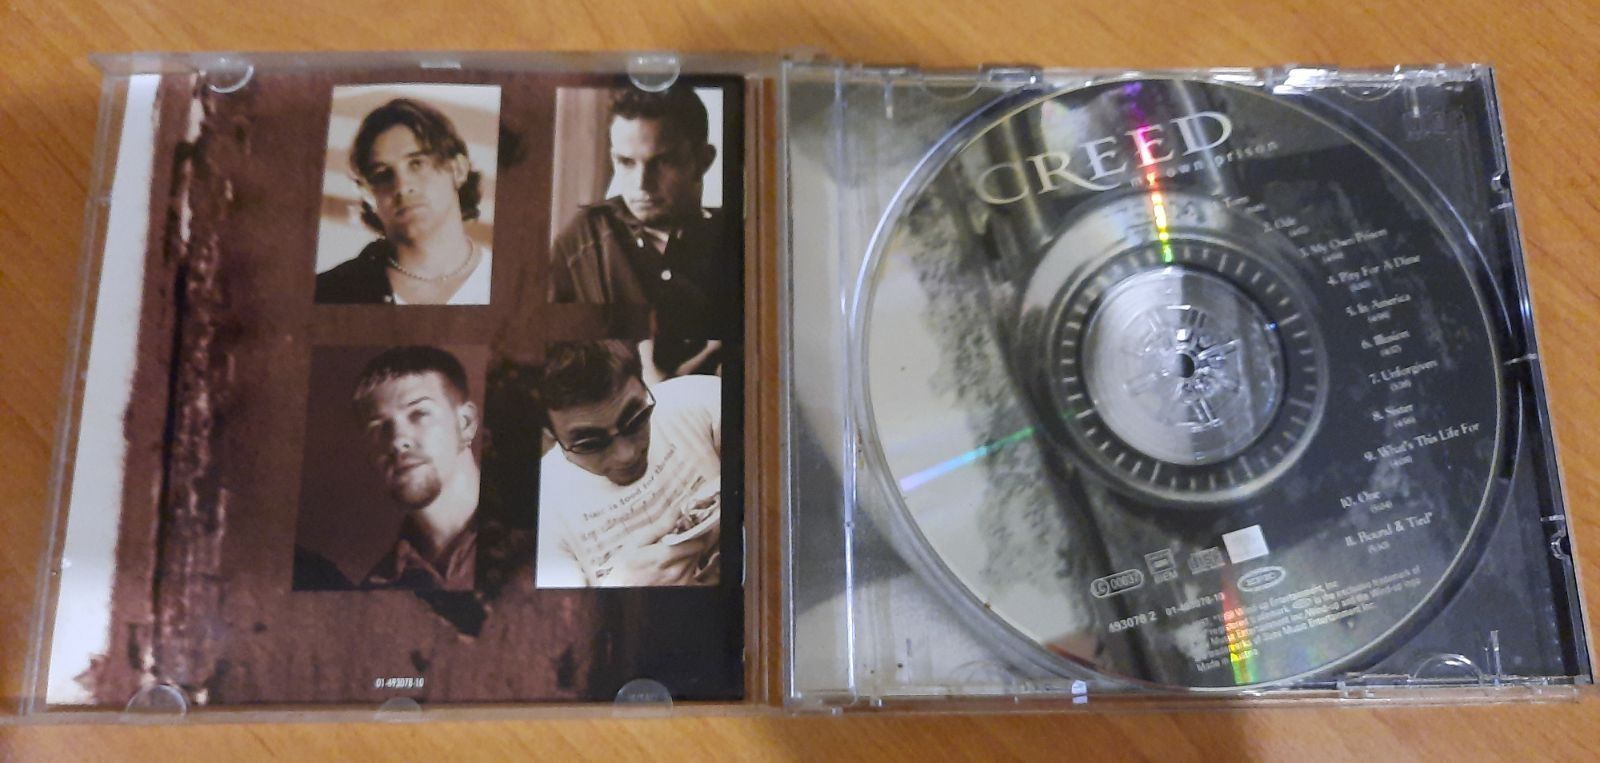 Creed "My own prison" CD Диск